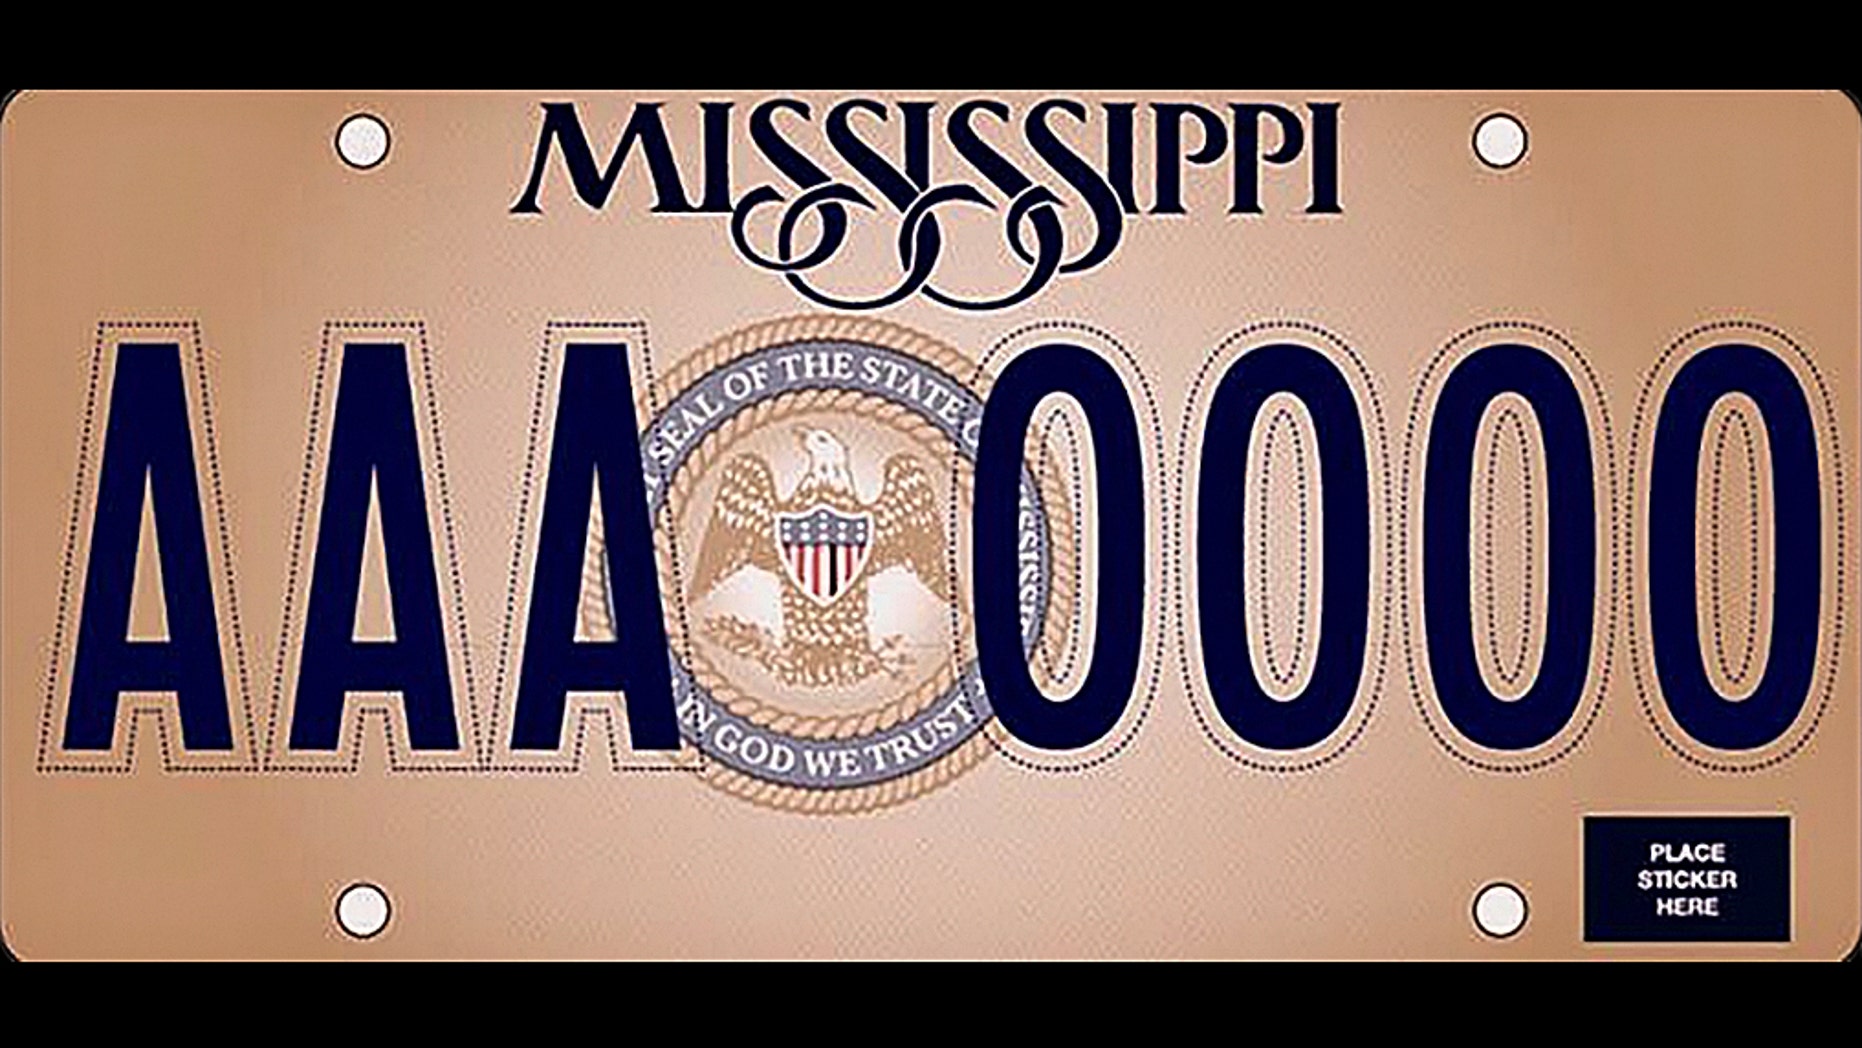 Mississippi unveils new state license plates with 'In God We Trust